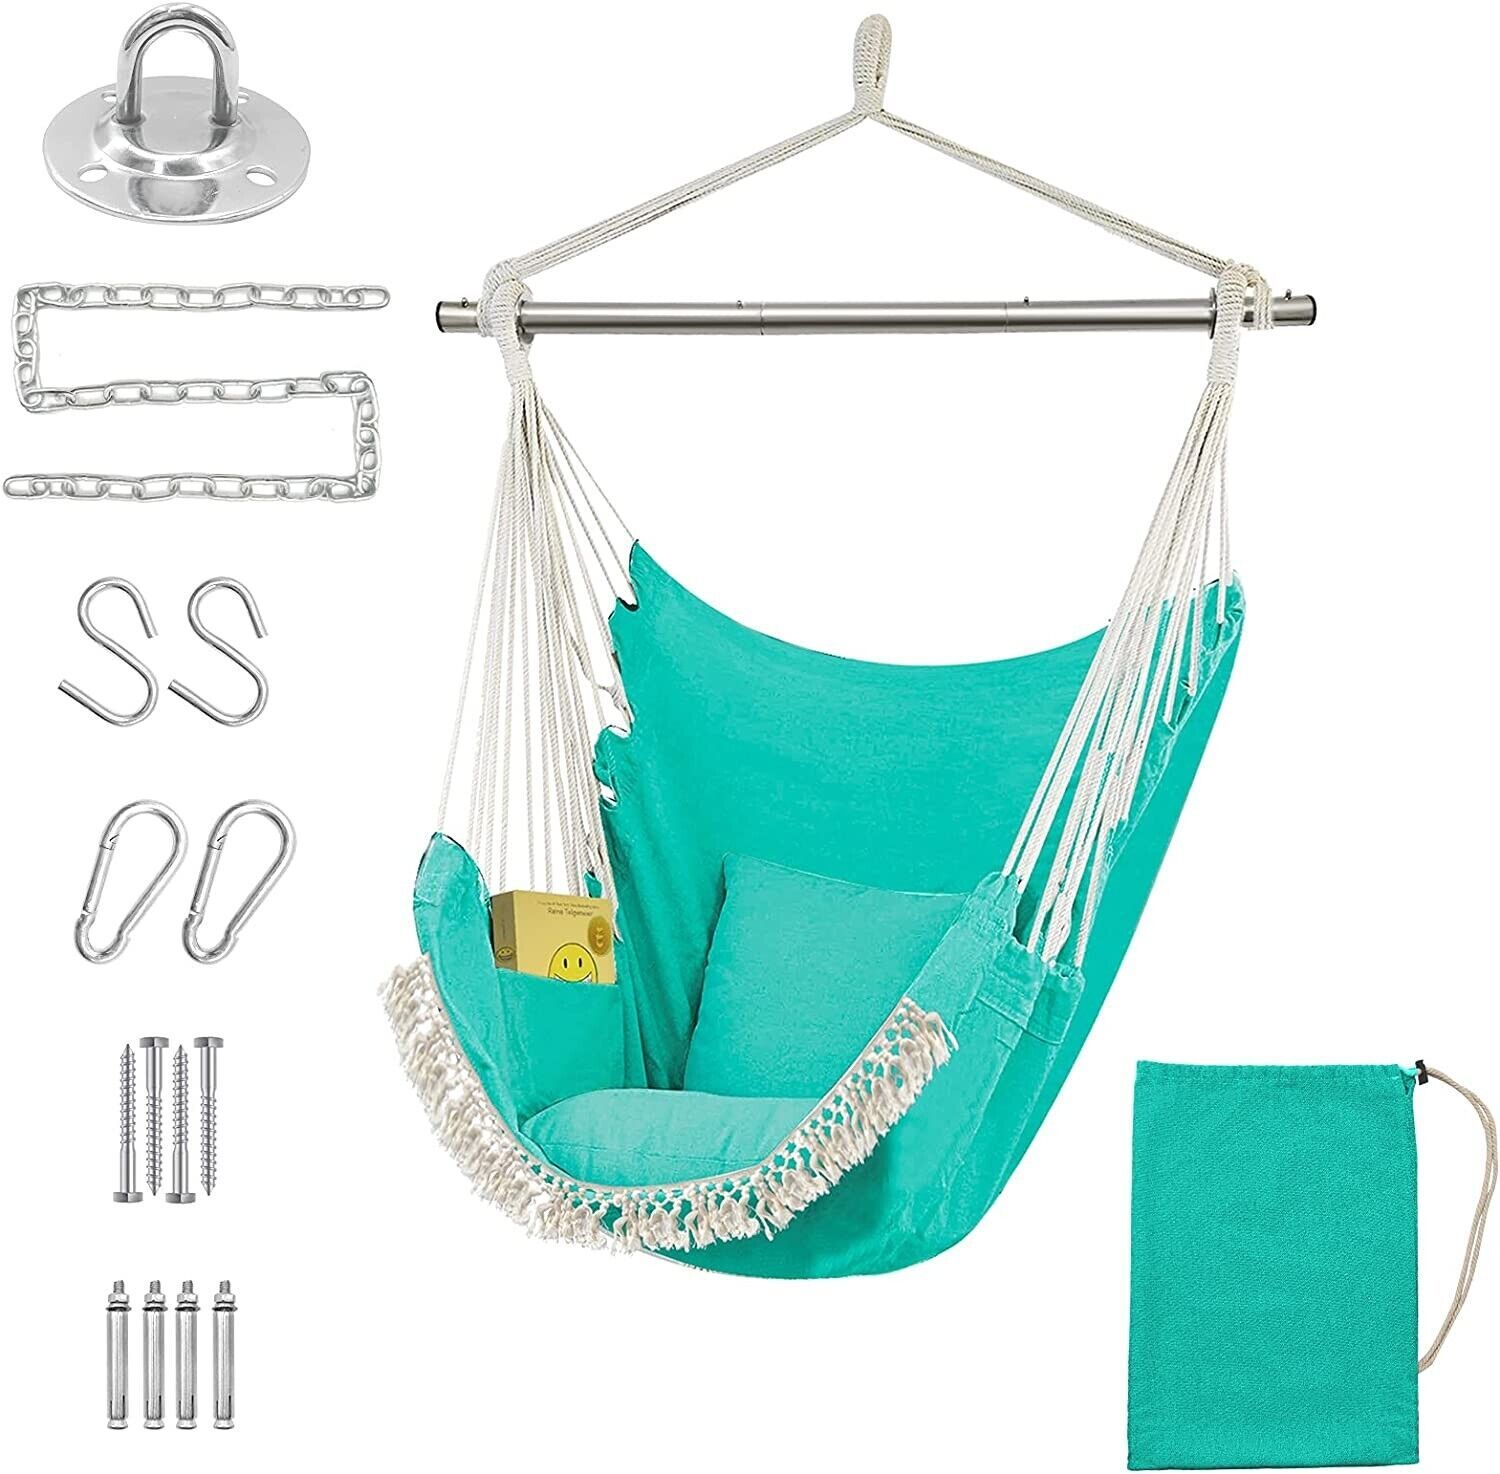 Hammock Swing Chair, Hanging Chair with Pocket, Detachable Steel Support Green - $33.25